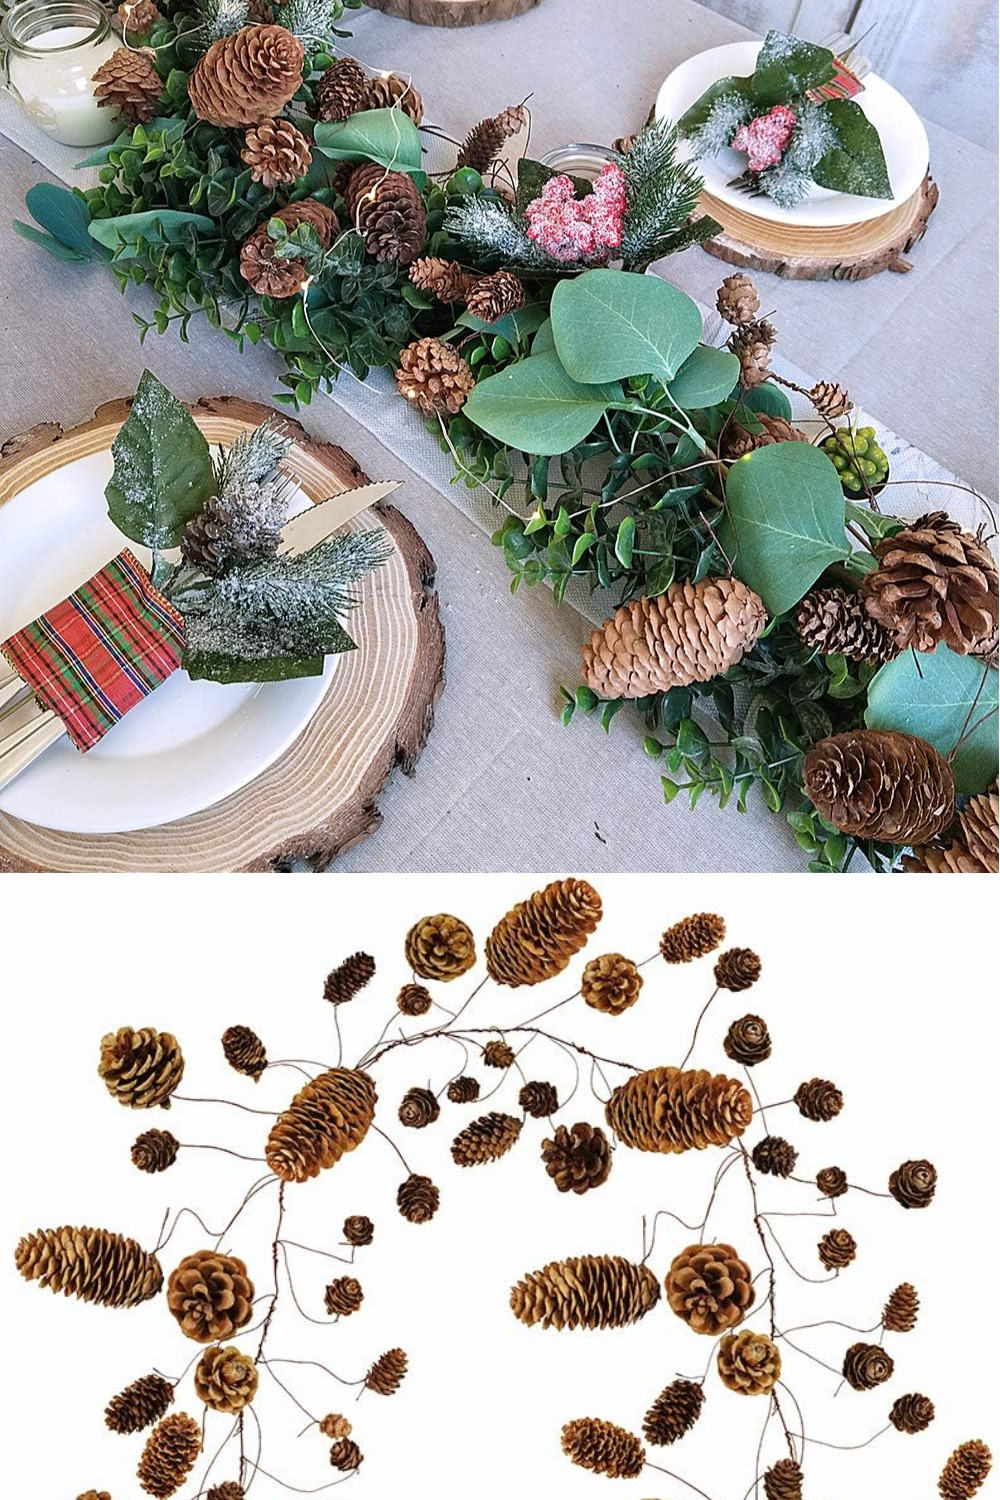 55" Long Rustic Assorted 78 Pcs Pine Cones Holiday Twig Garland Dried Natural Hanging Pinecones String Various Pine Cones Vine for Christmas Winter Festival Table Runner Indoor Outdoor Décor